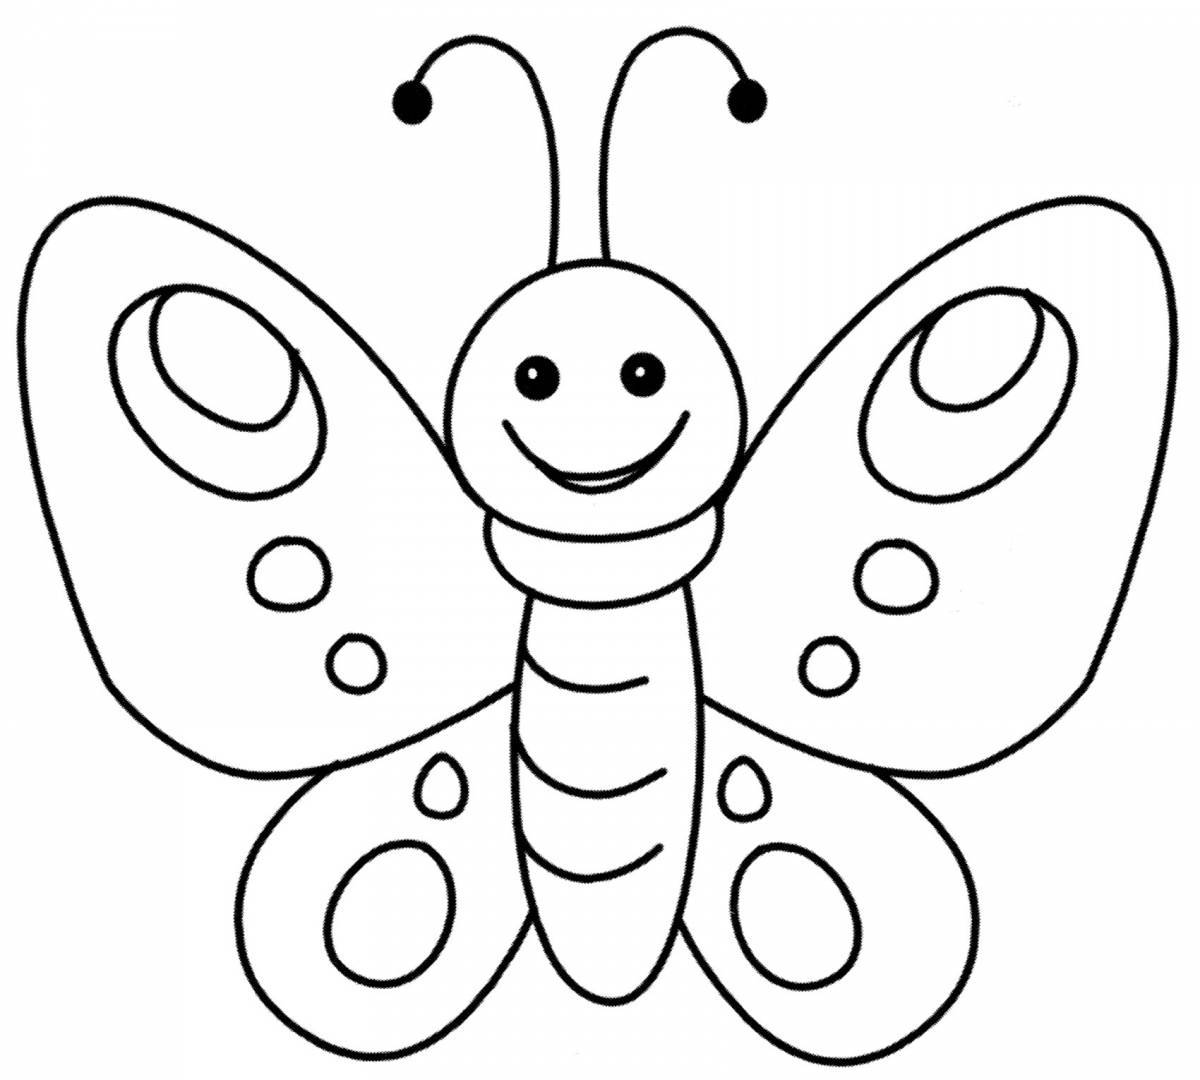 Coloring book cheerful butterfly for children 6-7 years old